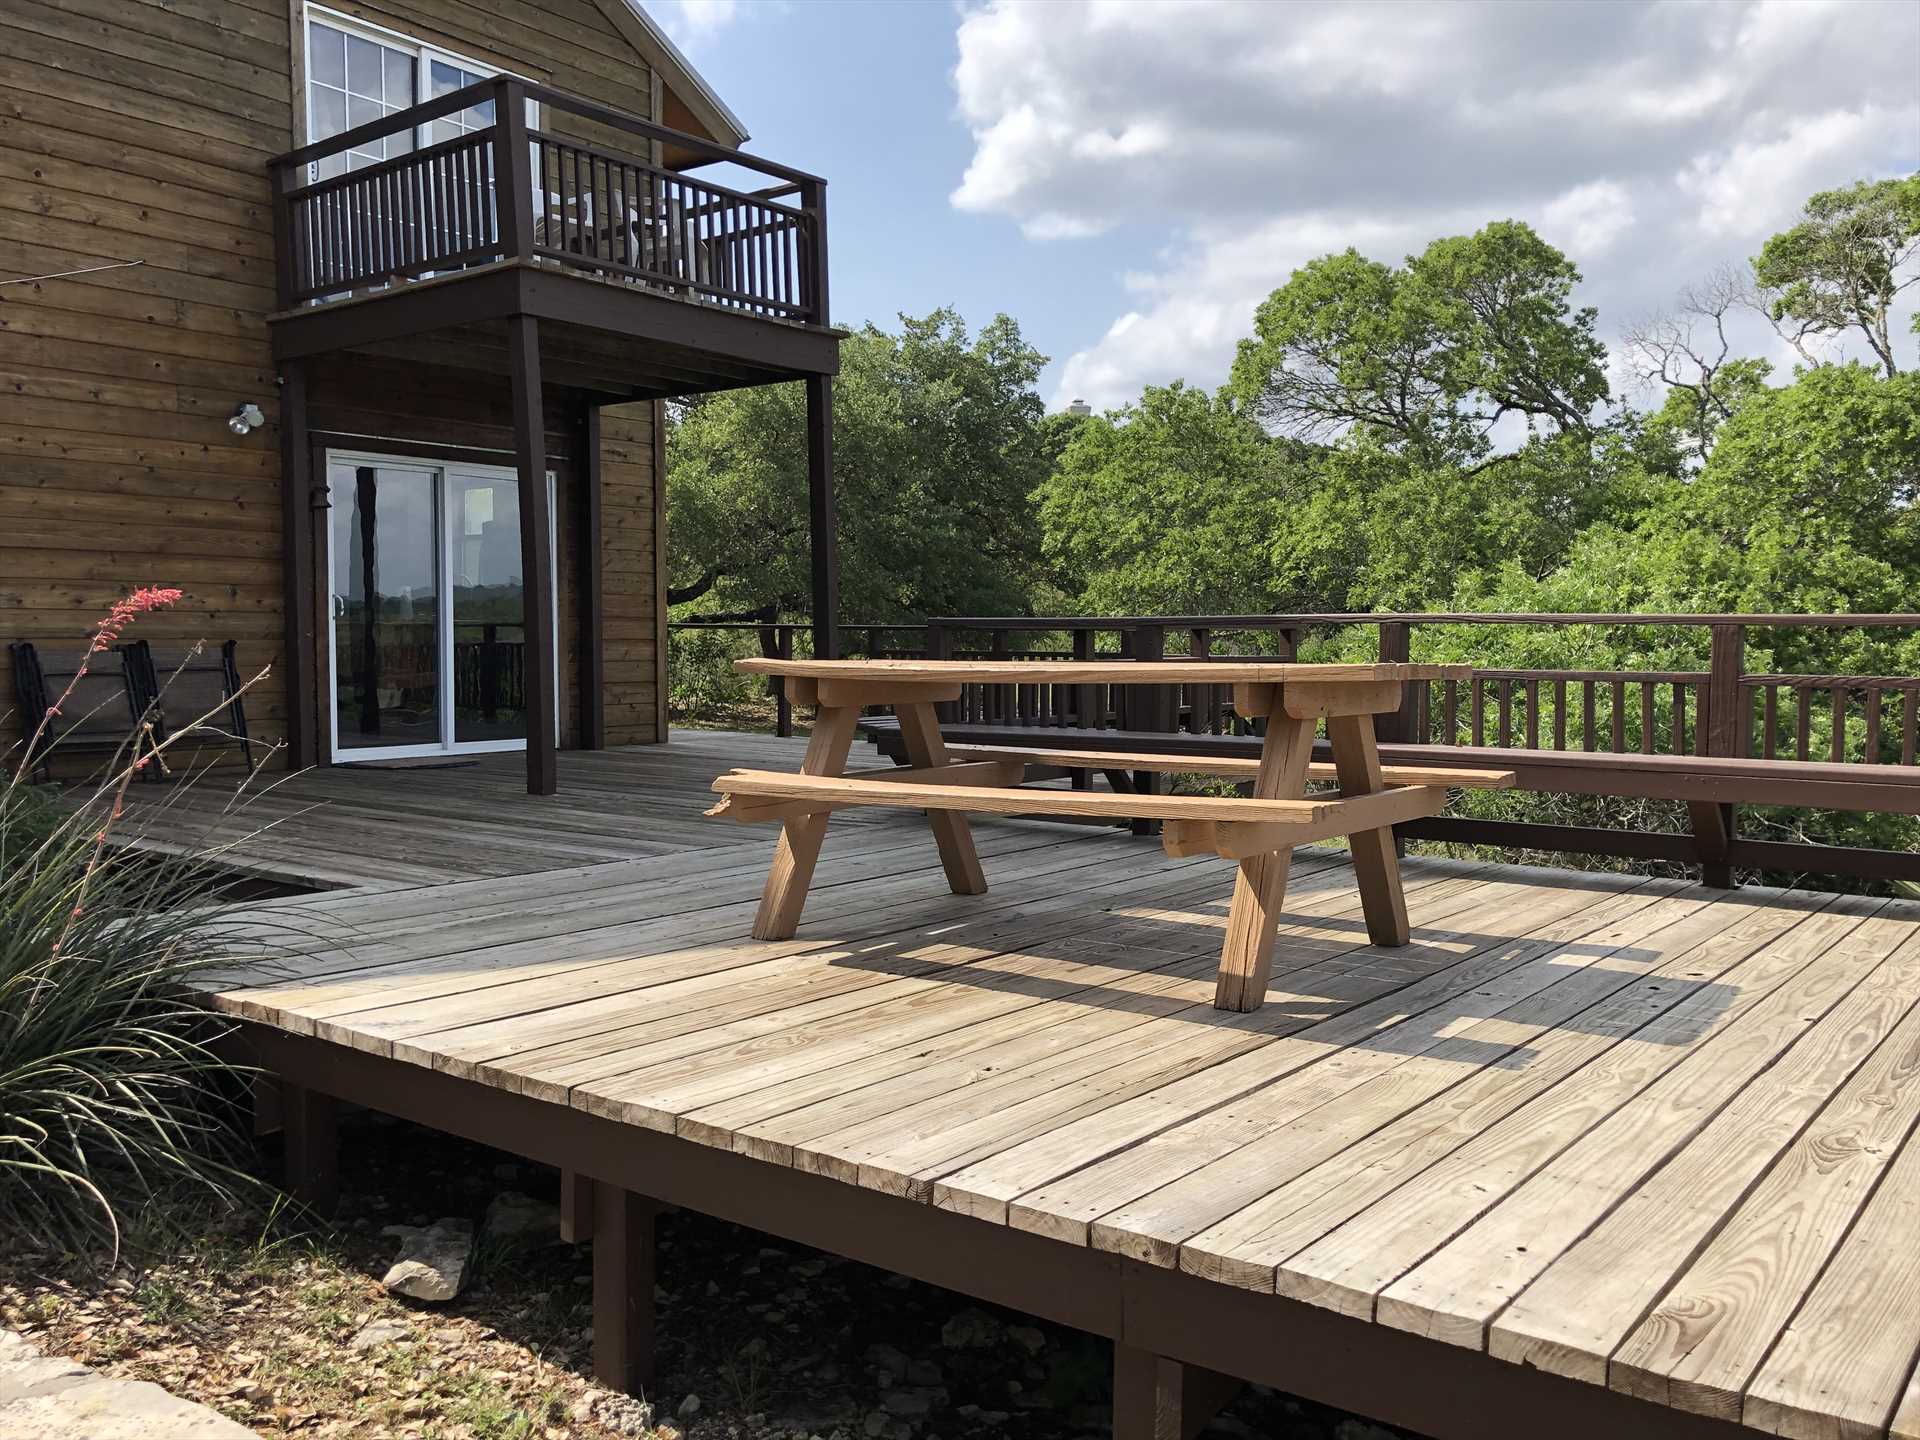                                                 The upper level of the back deck features a picnic table and bench-style seating. Just a few steps down from here is your private hot tub!